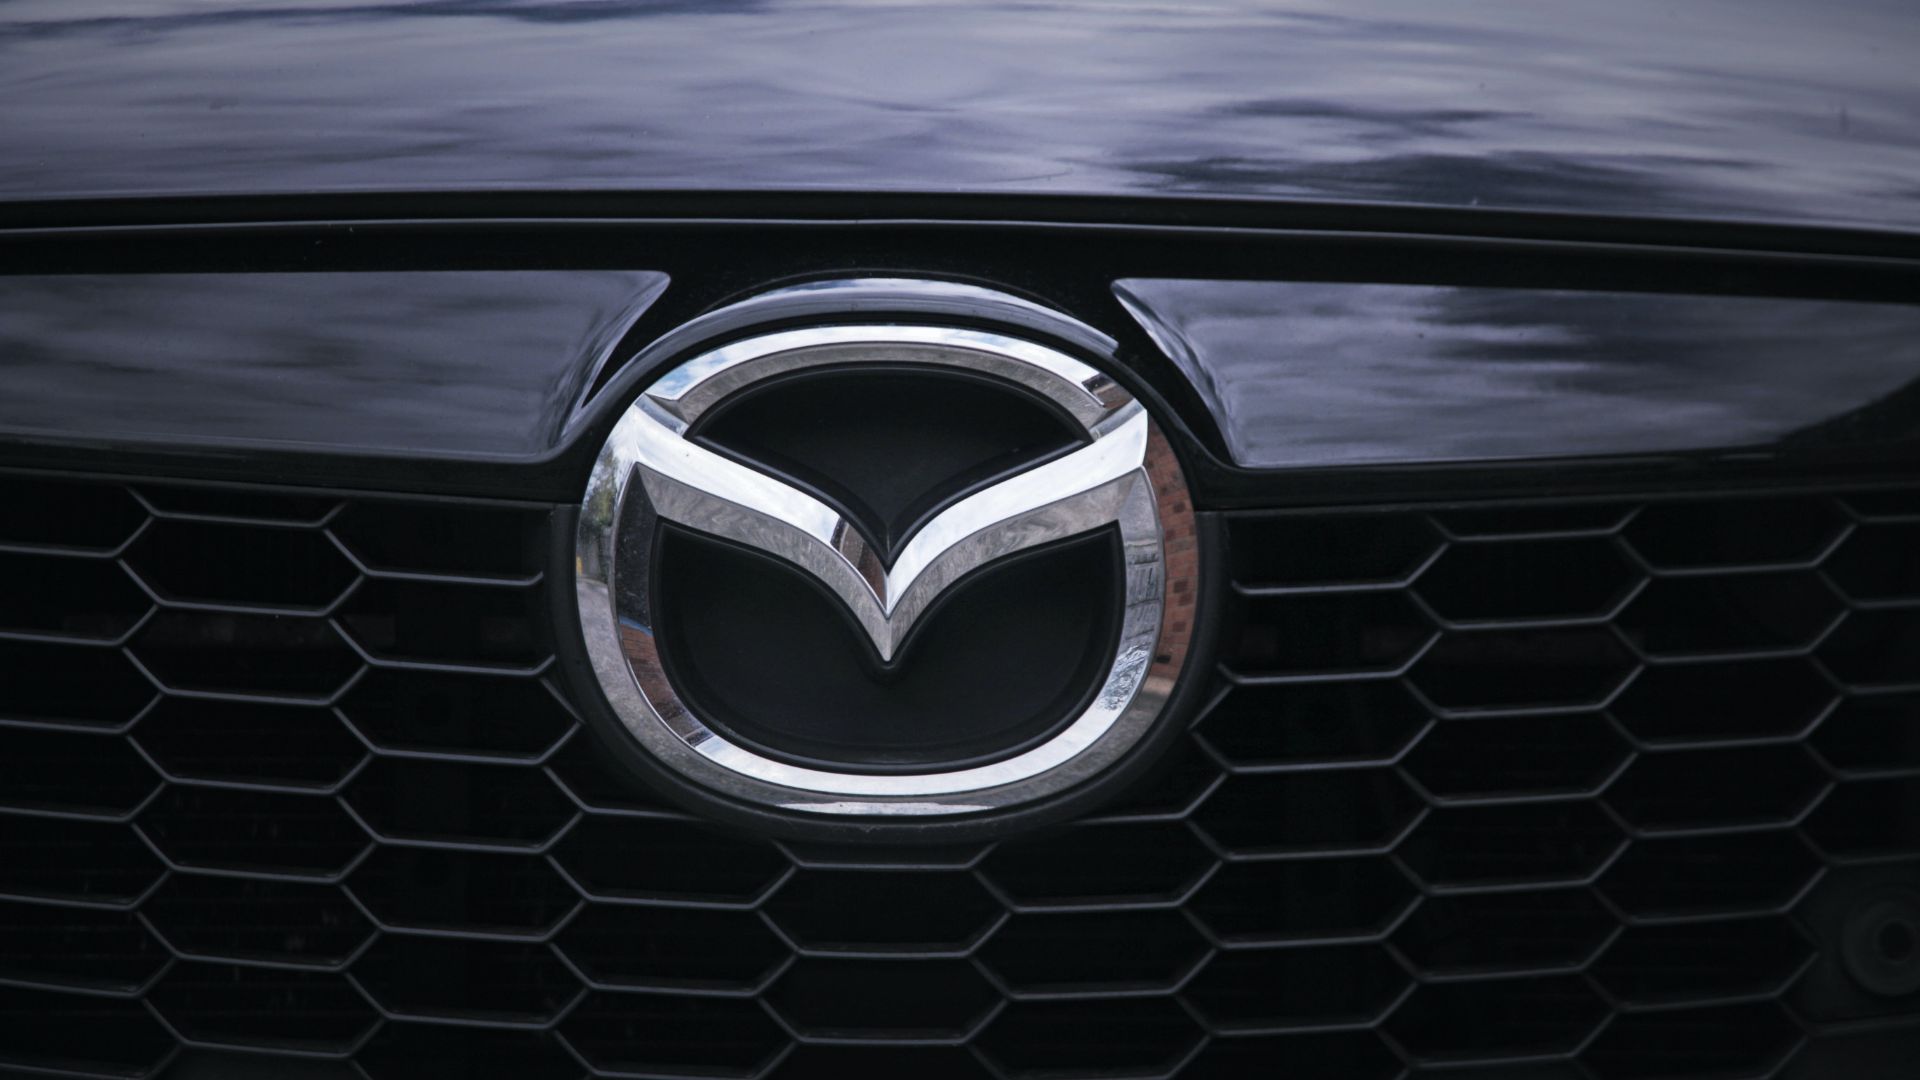 a close up of a mazda logo on a car.